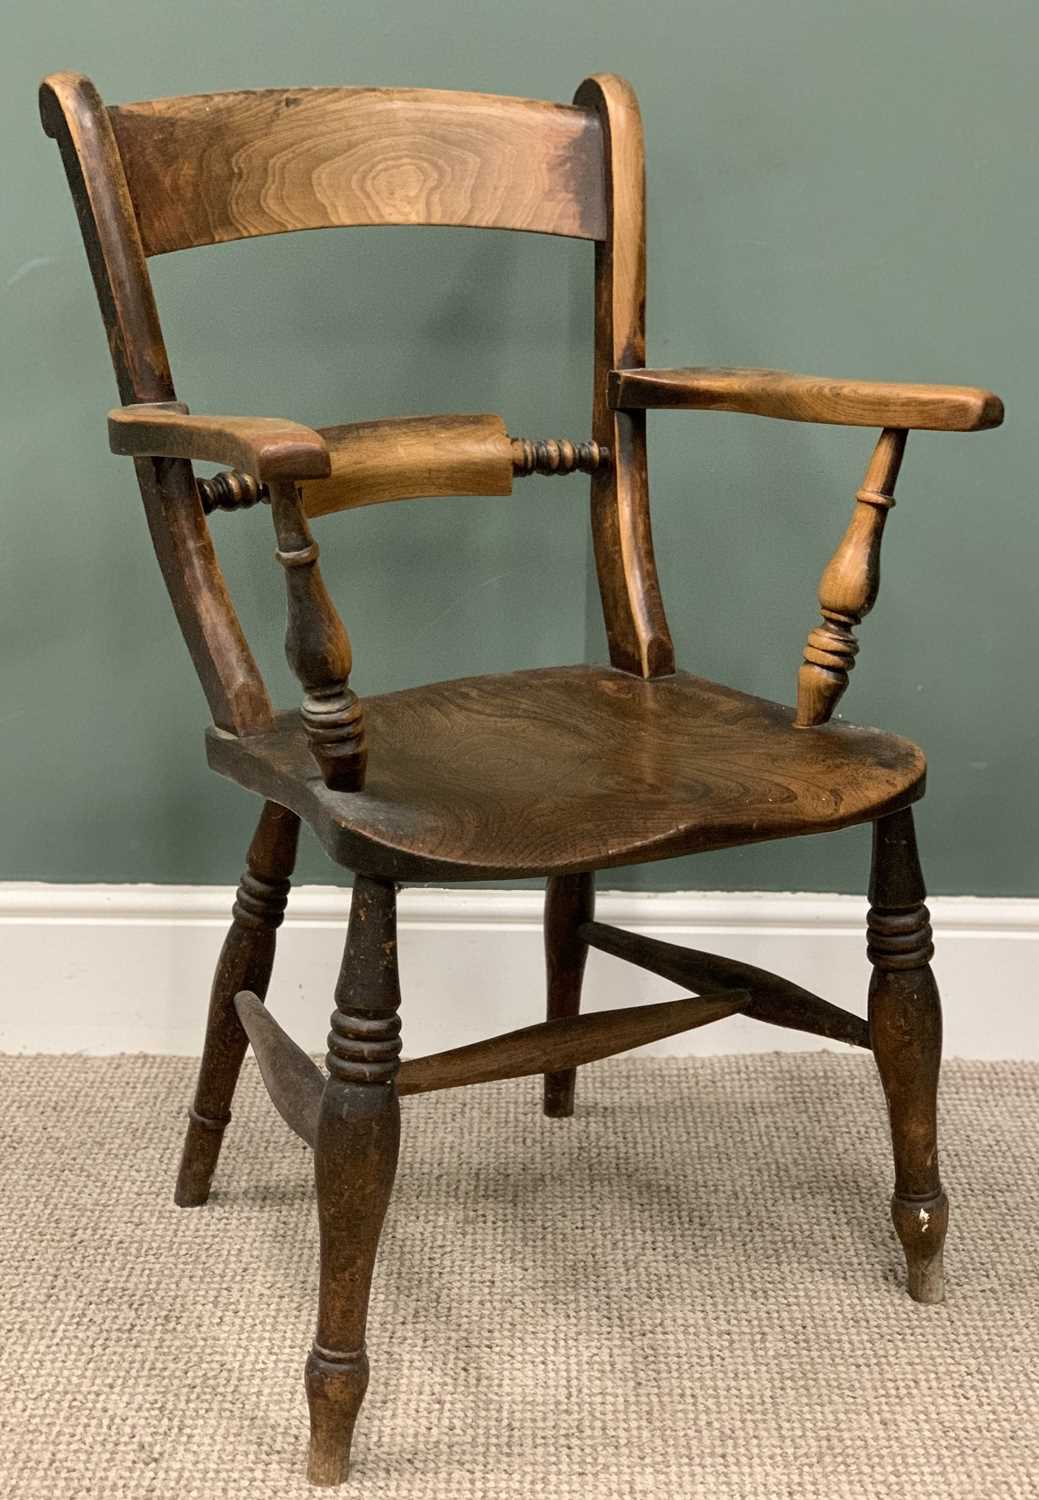 THREE ITEMS OF VINTAGE FURNITURE including unusual chair with slatted seat and a barley twist oblong - Image 6 of 6